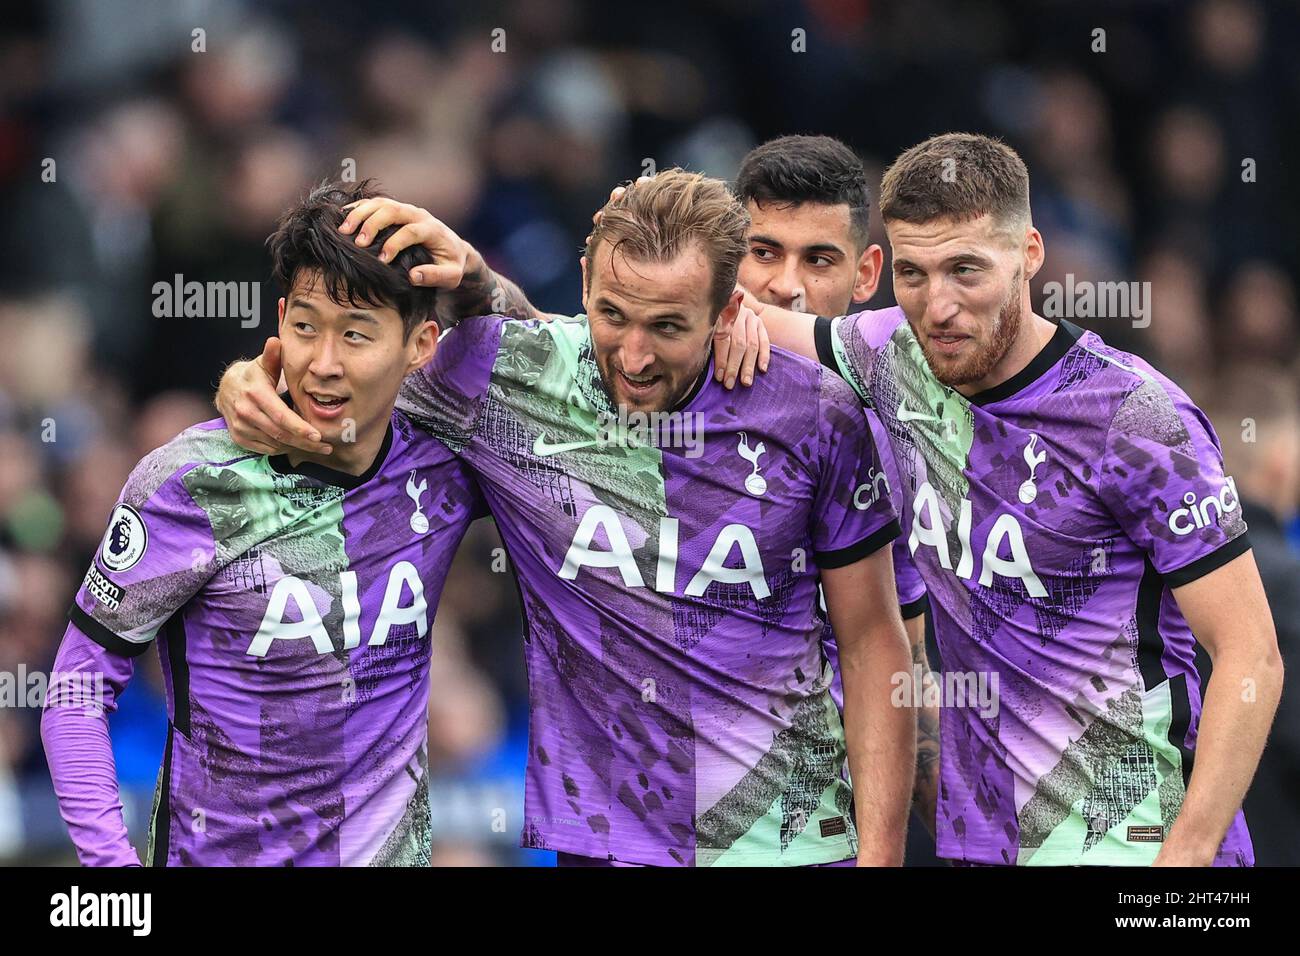 Kane FC has 0 trophies' - Heung-Min Son 'likes' Instagram photo calling out  Tottenham star after he misses training